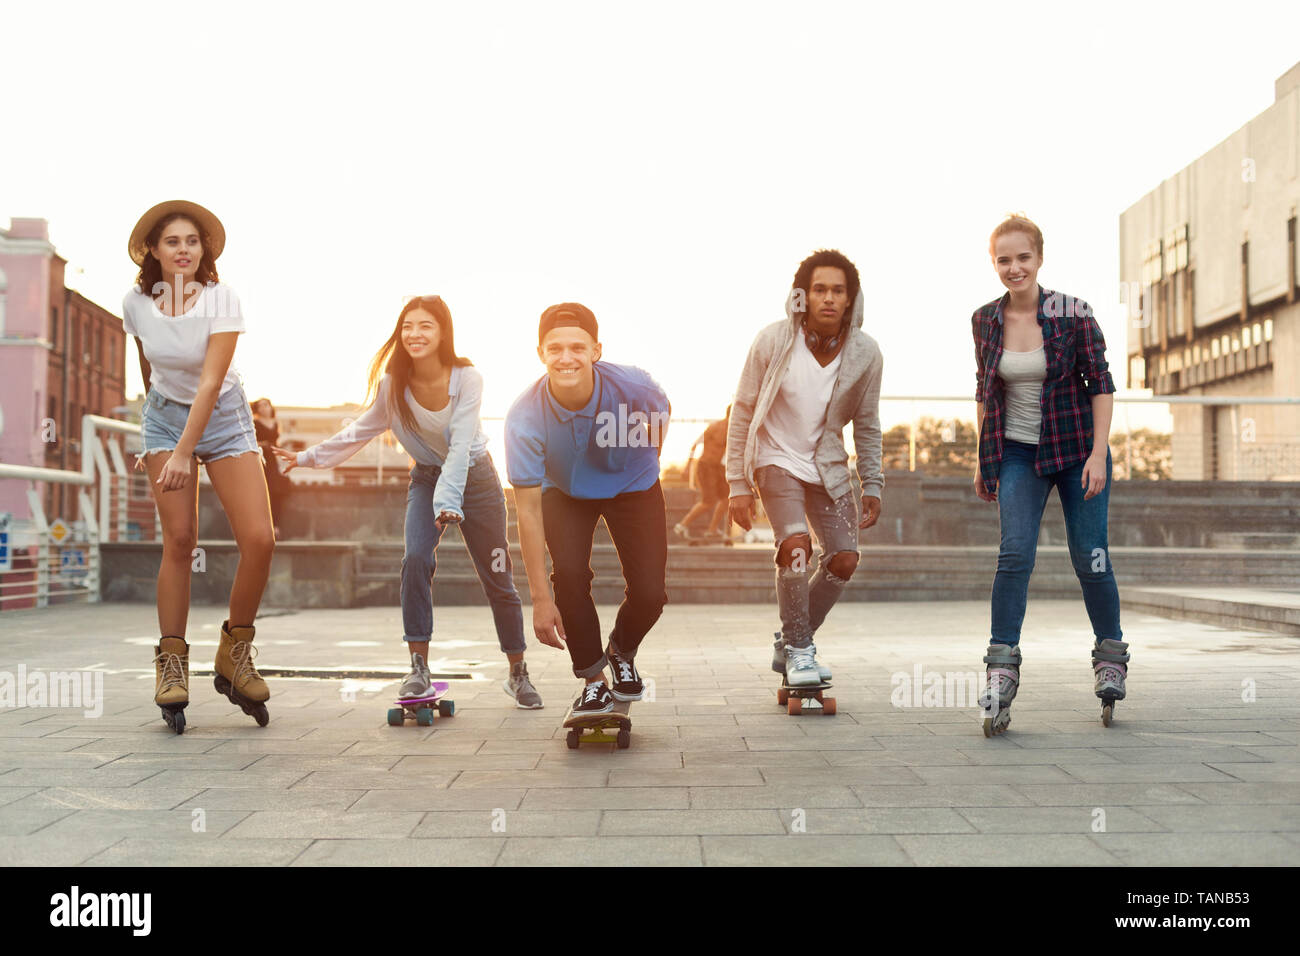 Group of diverse young people skateboarding and rolling in urban area Stock Photo